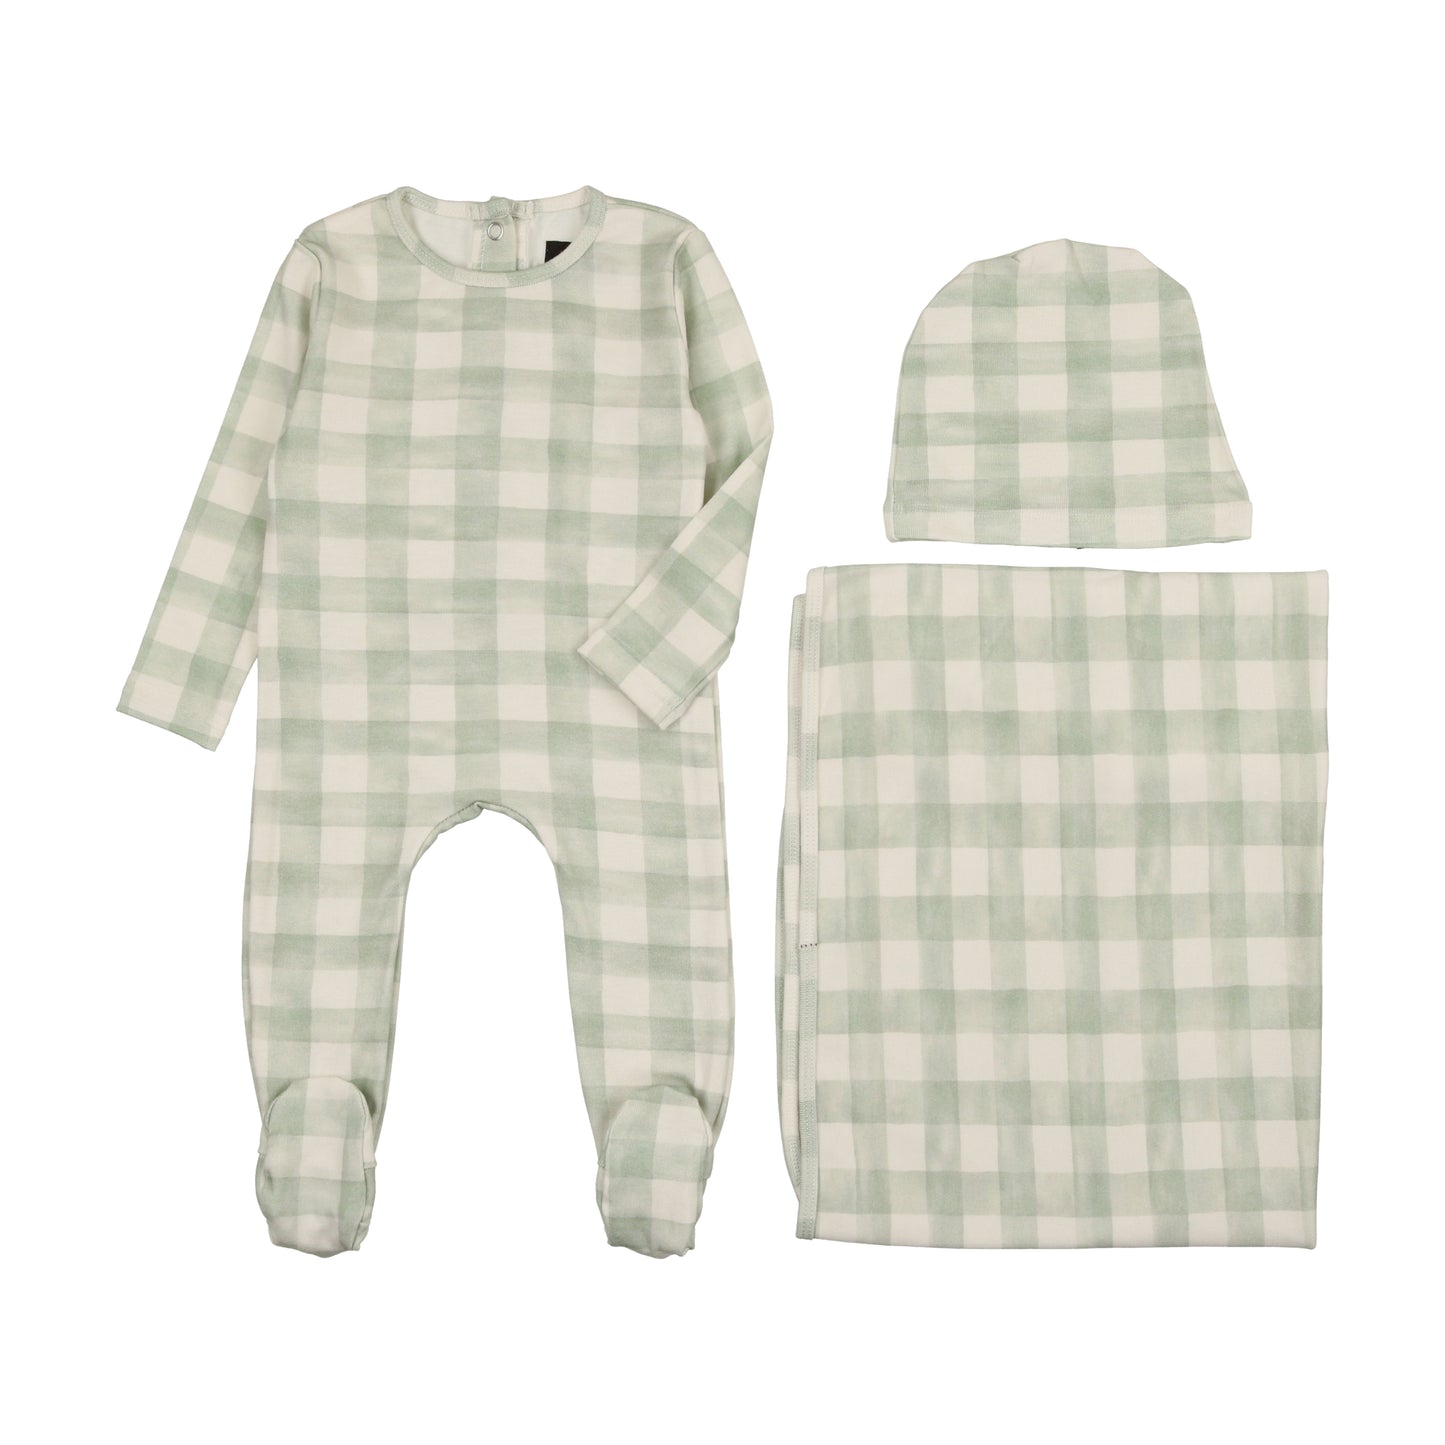 Mint Checked Blanket